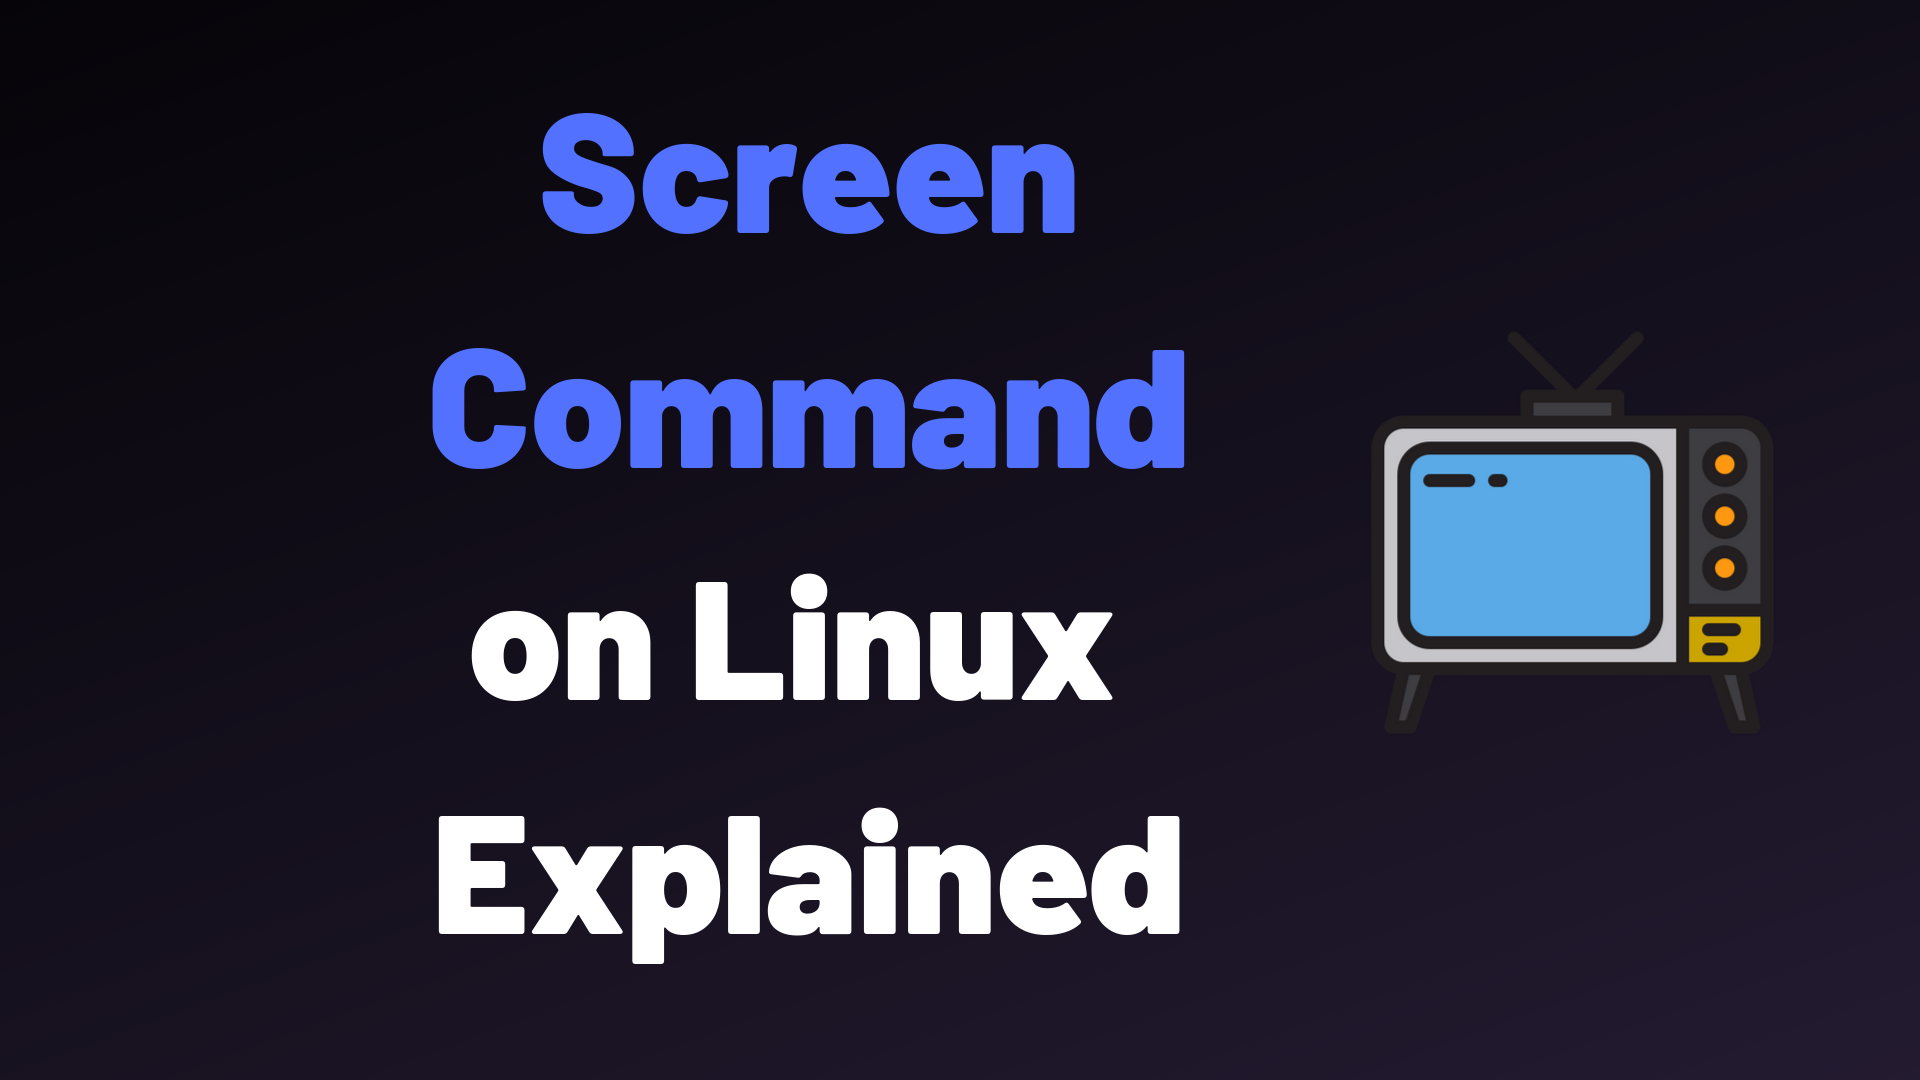 Screen Command on Linux Explained